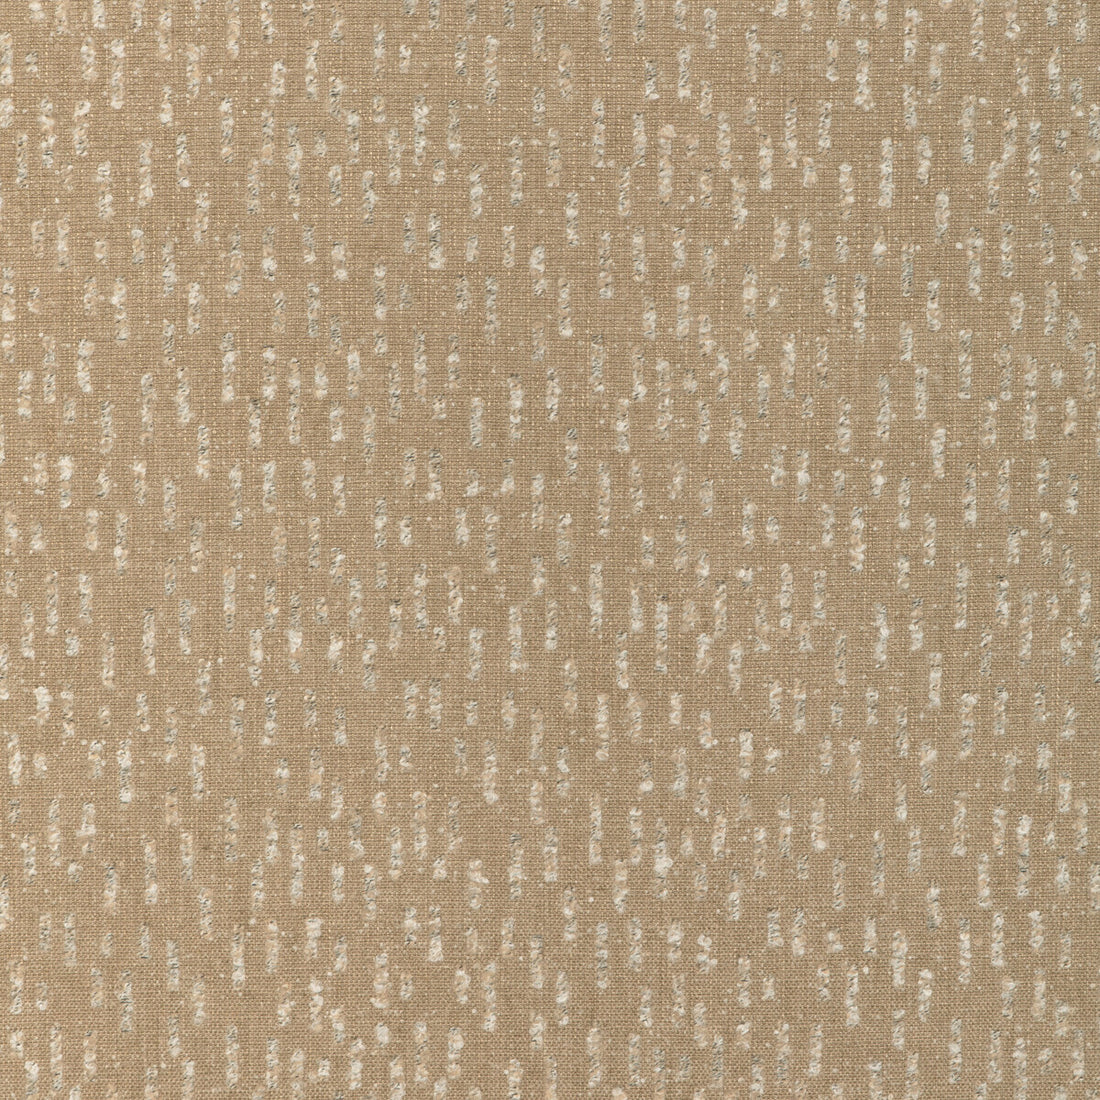 Slew fabric in taupe color - pattern GWF-3794.106.0 - by Lee Jofa Modern in the Kelly Wearstler VIII collection